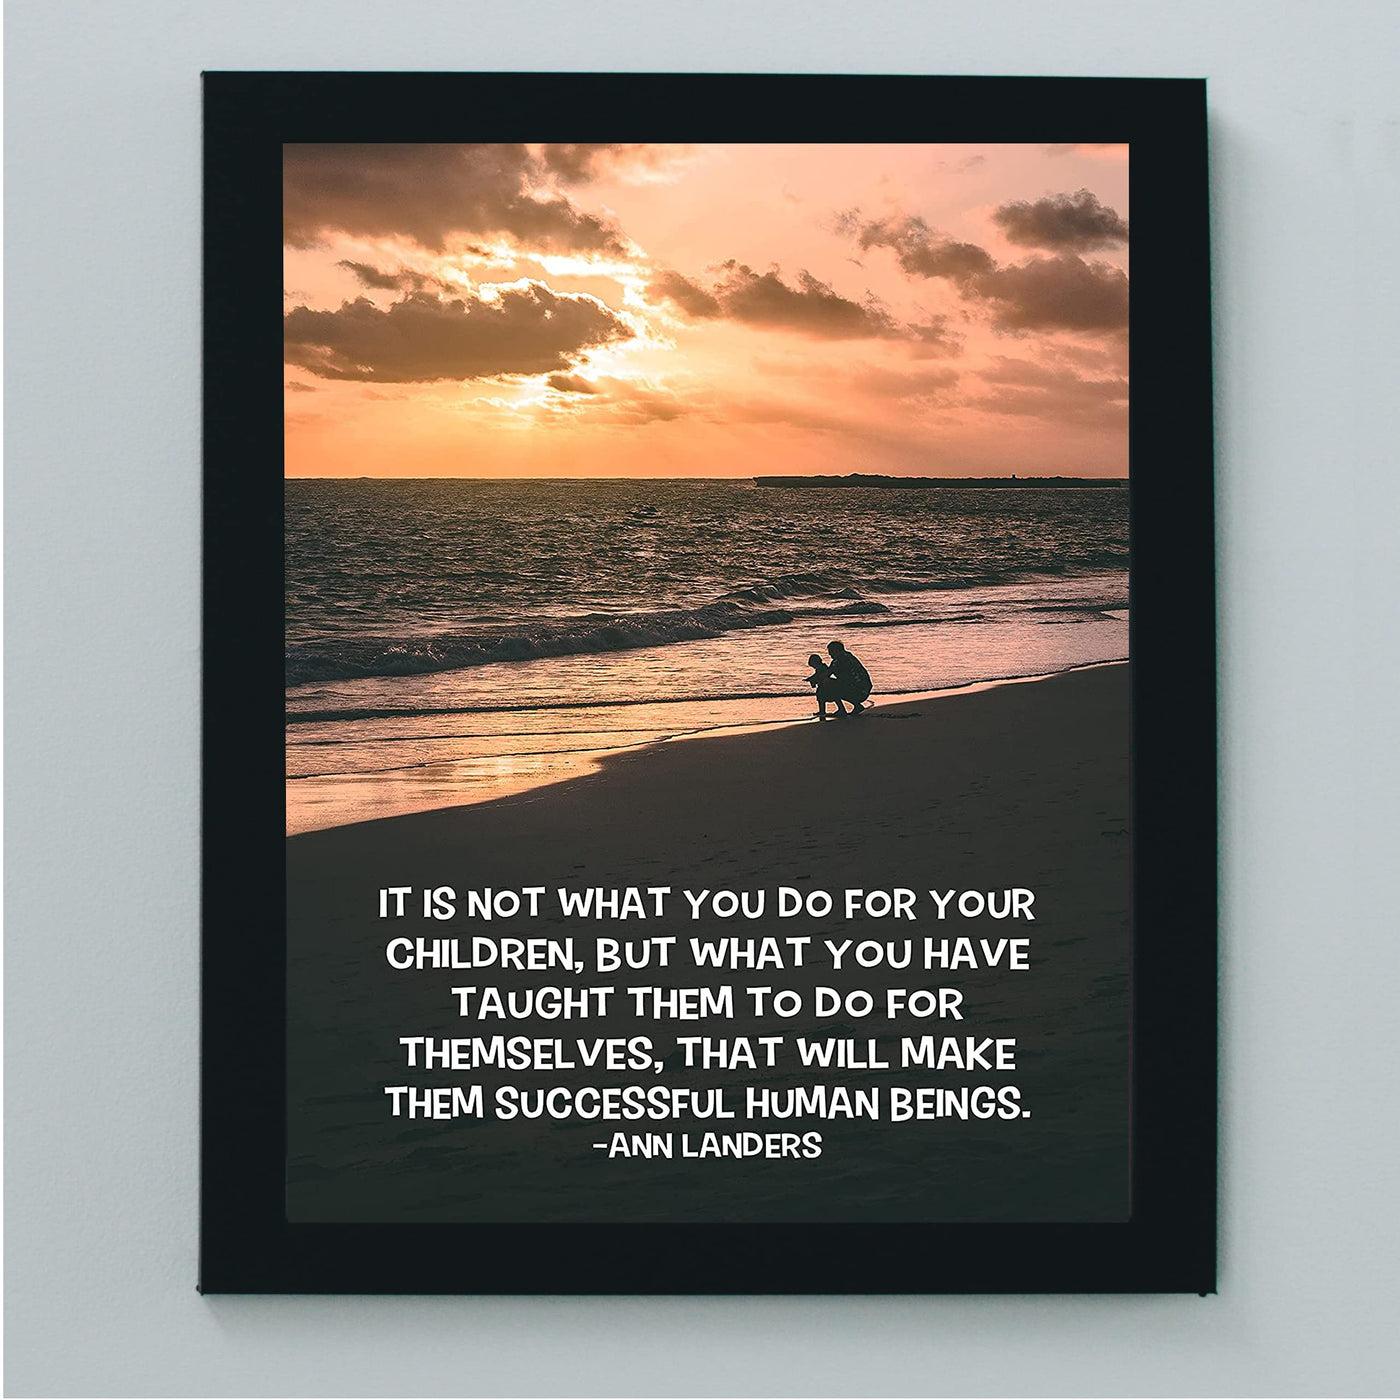 Ann Landers Quotes-"What You Have Taught Them" Family Wall Art-8 x 10" Inspirational Typographic Beach Print-Ready to Frame. Home-Office-School Decor. Great Gift-Positive Advice for All Parents!